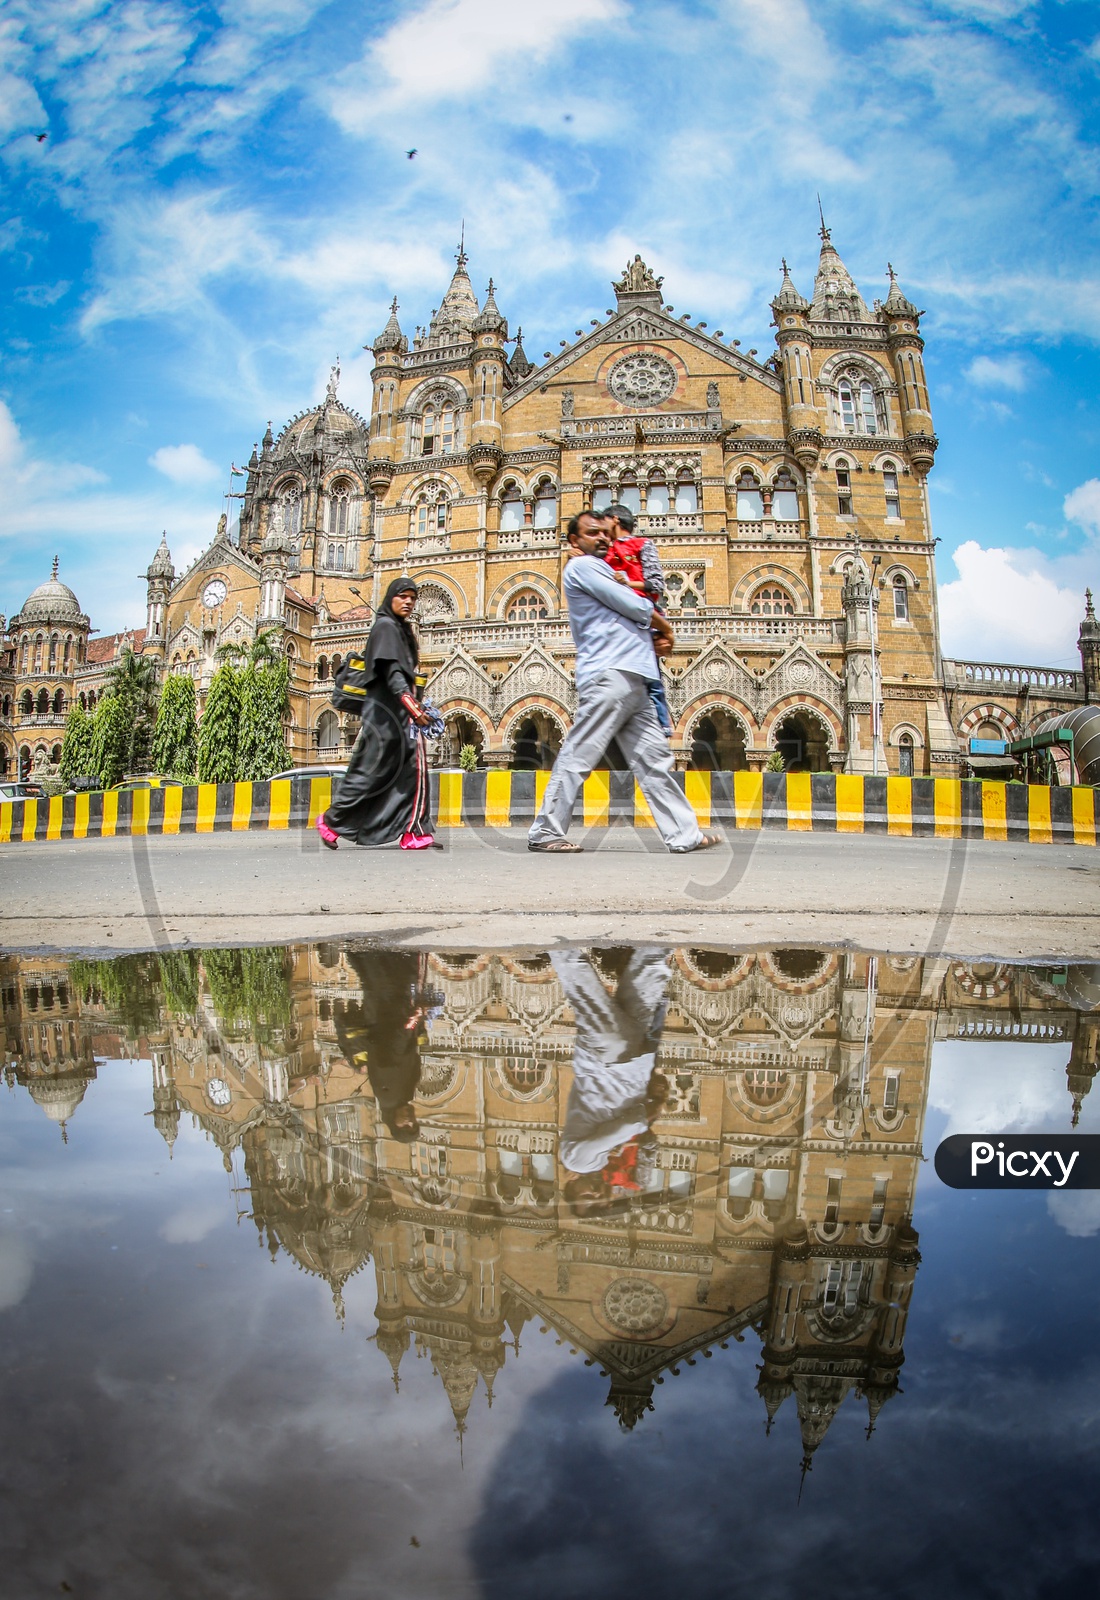 A Couple Walking On The Roads With Mumbai CST Or Chatrapati Shivaji Terminus in Background